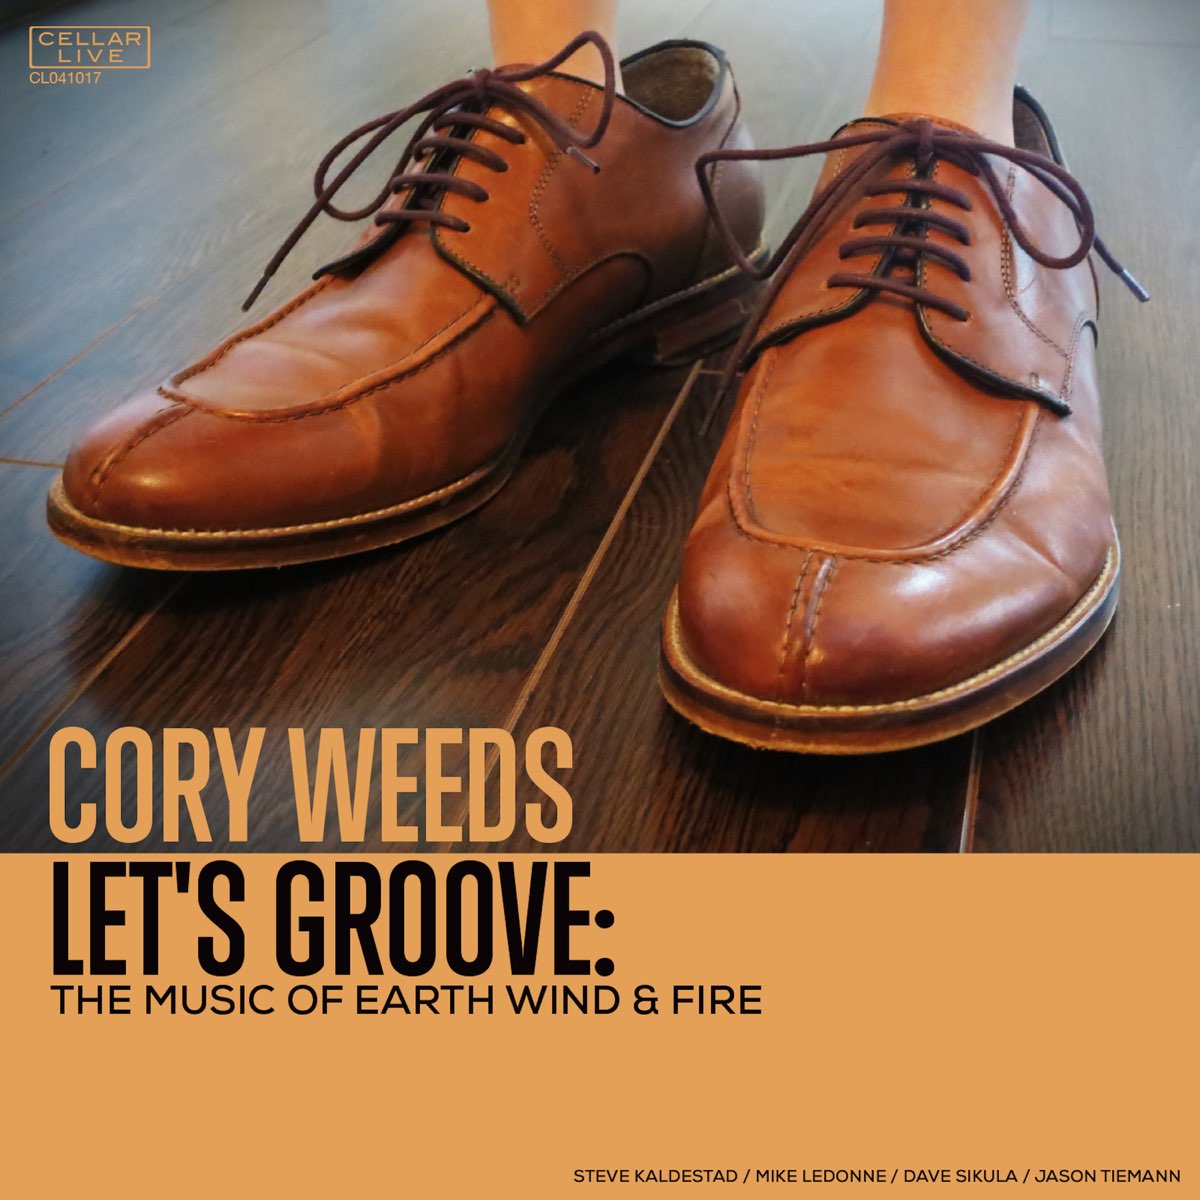 Cory Weeds. Let's Groove Earth Wind Fire. Lets me fire